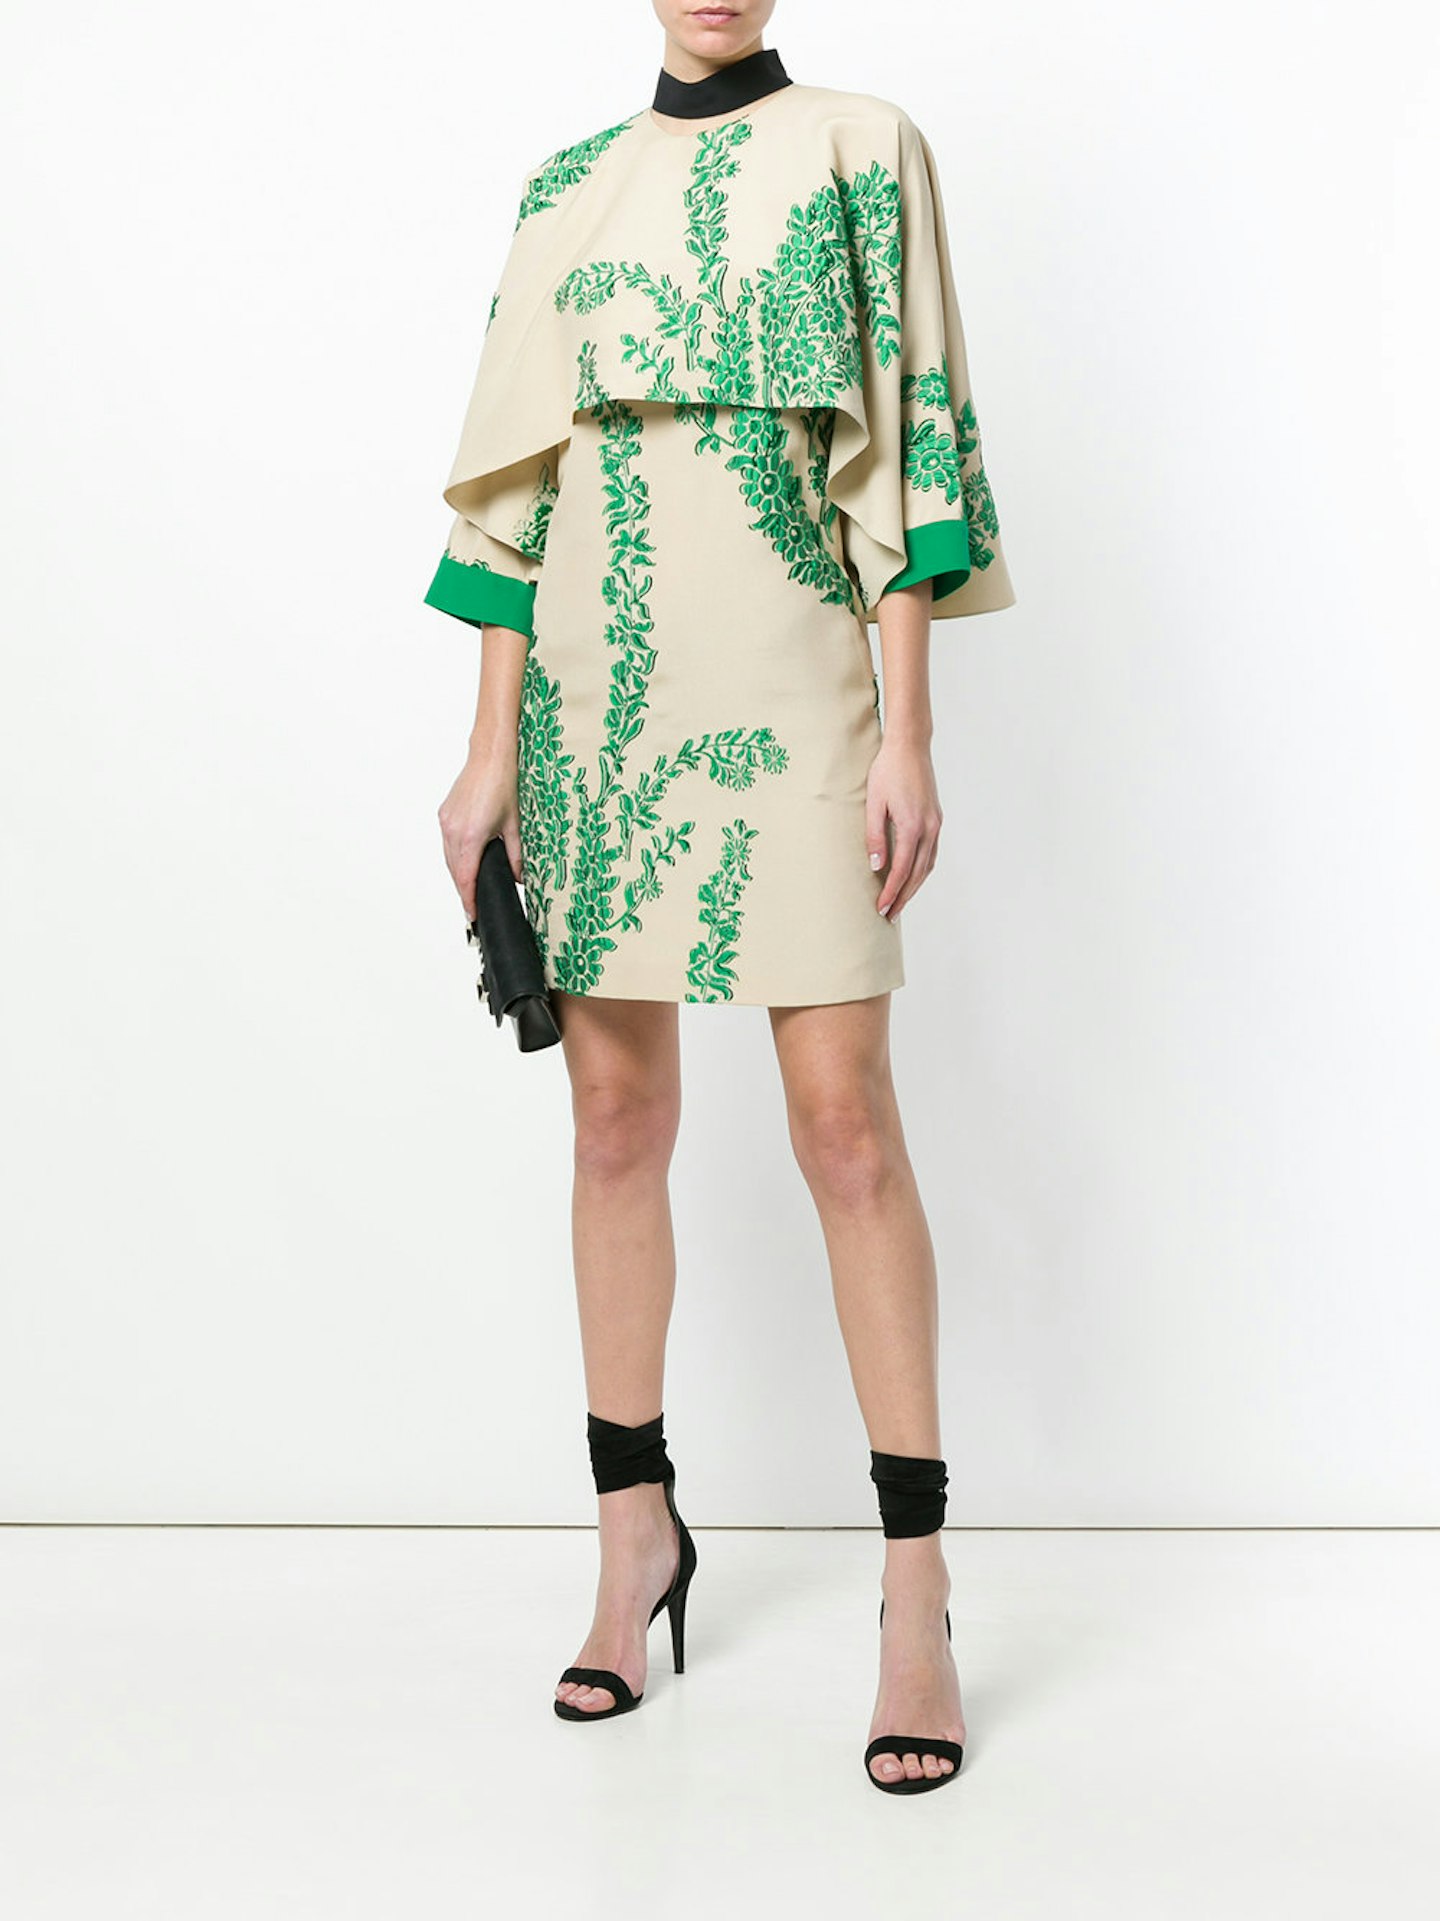 Fendi at Farfetch Floral Embroidered Dresss